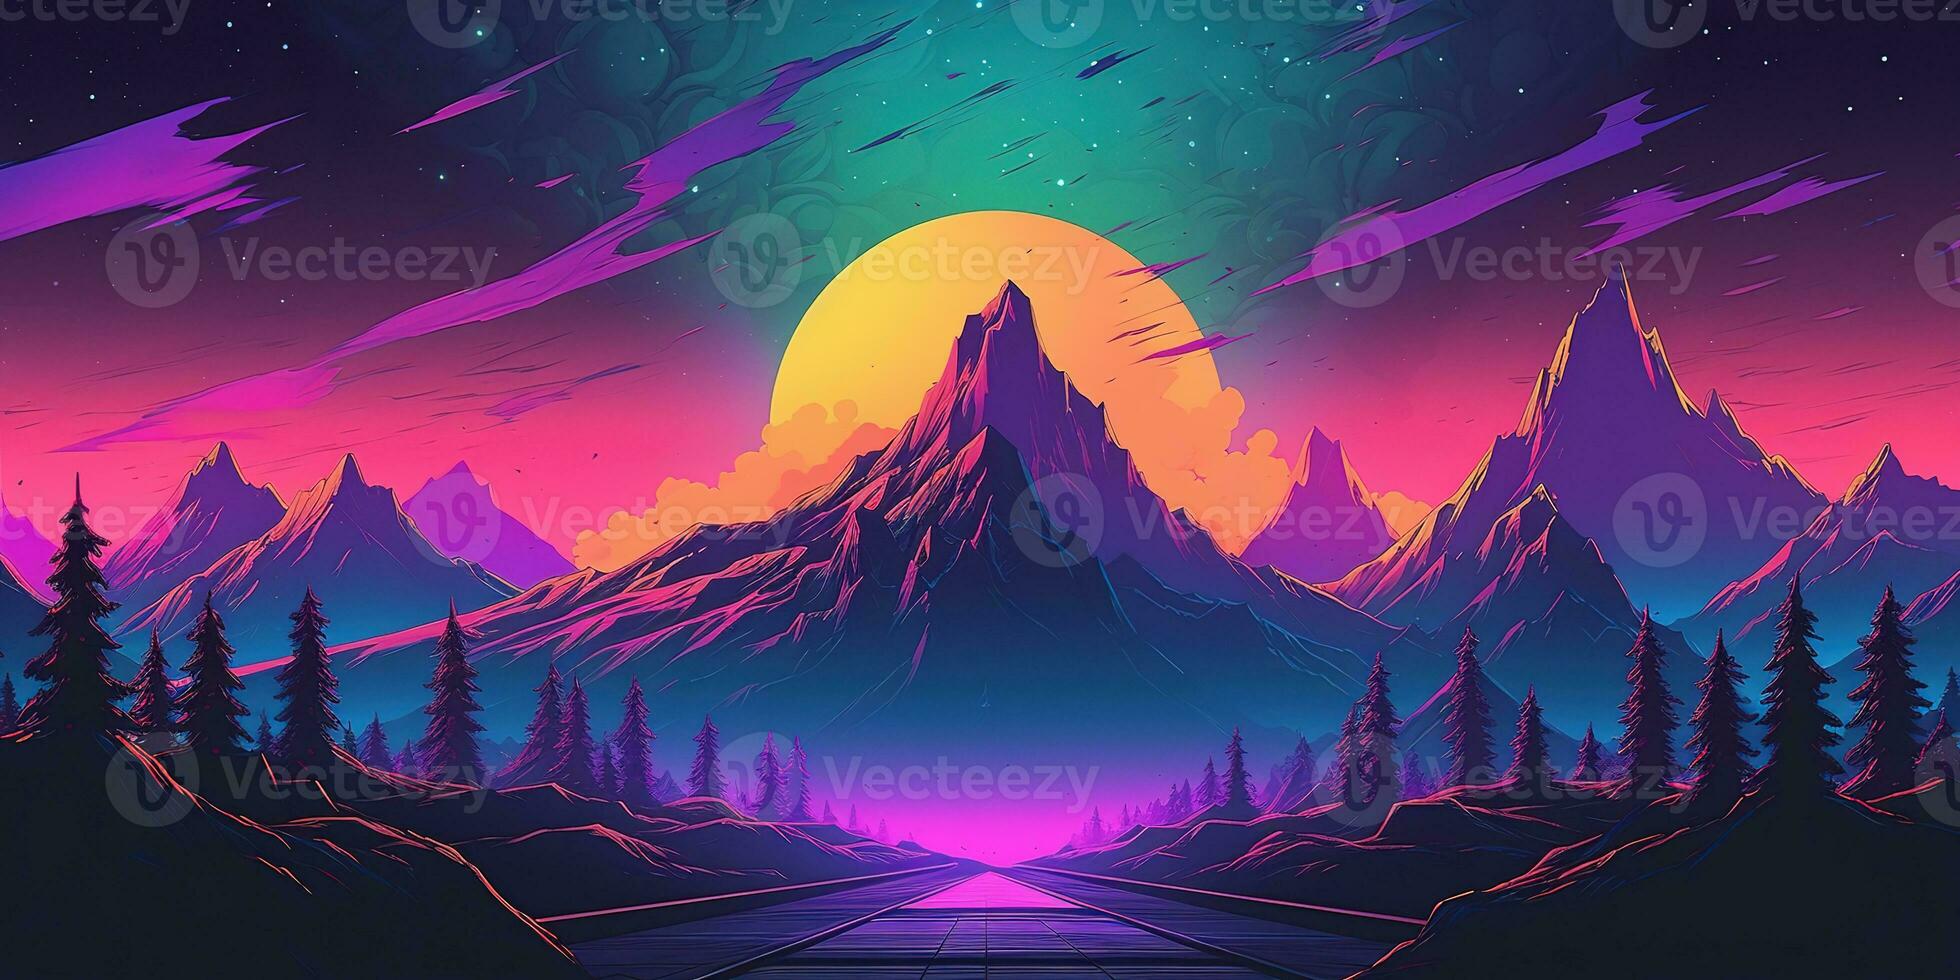  Neon PC Hintergrundbild 1960x980. Aesthetic mountain synthwave retrowave wallpaper with a cool and vibrant neon design, AI Generated